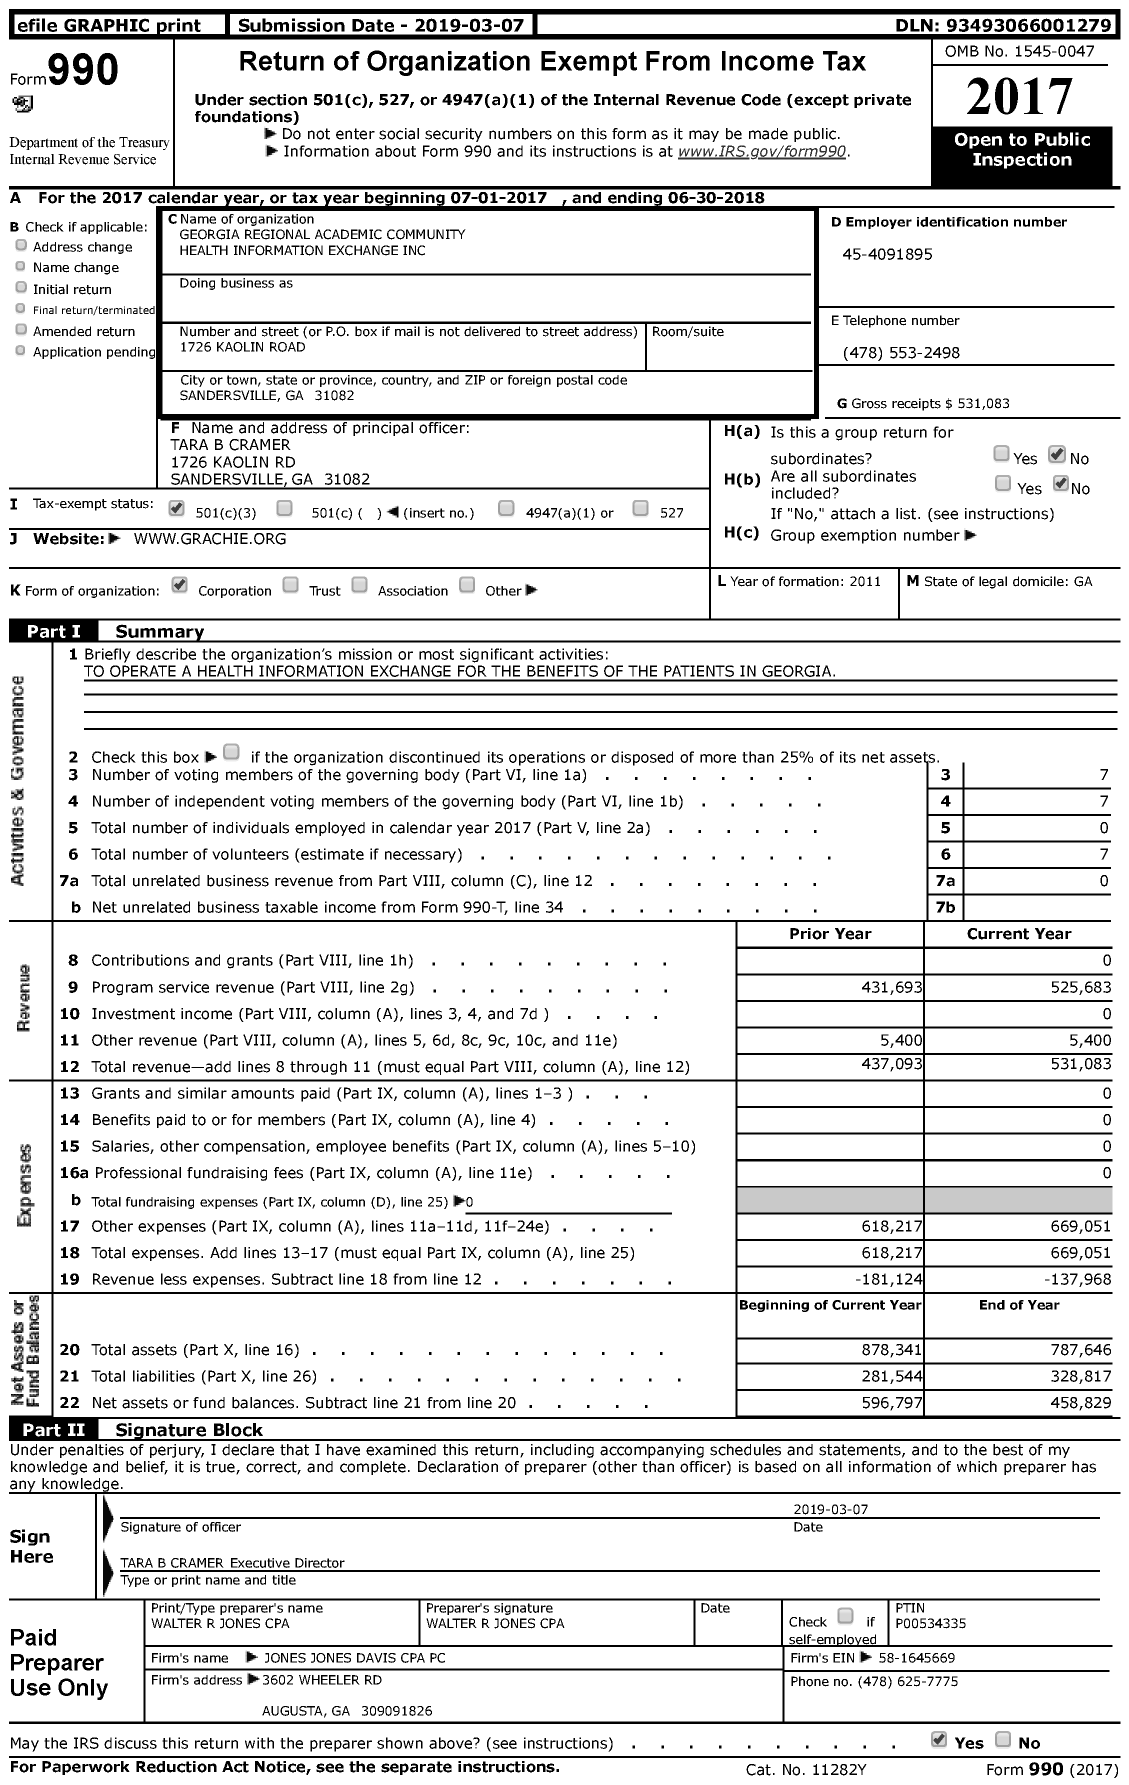 Image of first page of 2017 Form 990 for Georgia Regional Academic Community Health Information Exchange